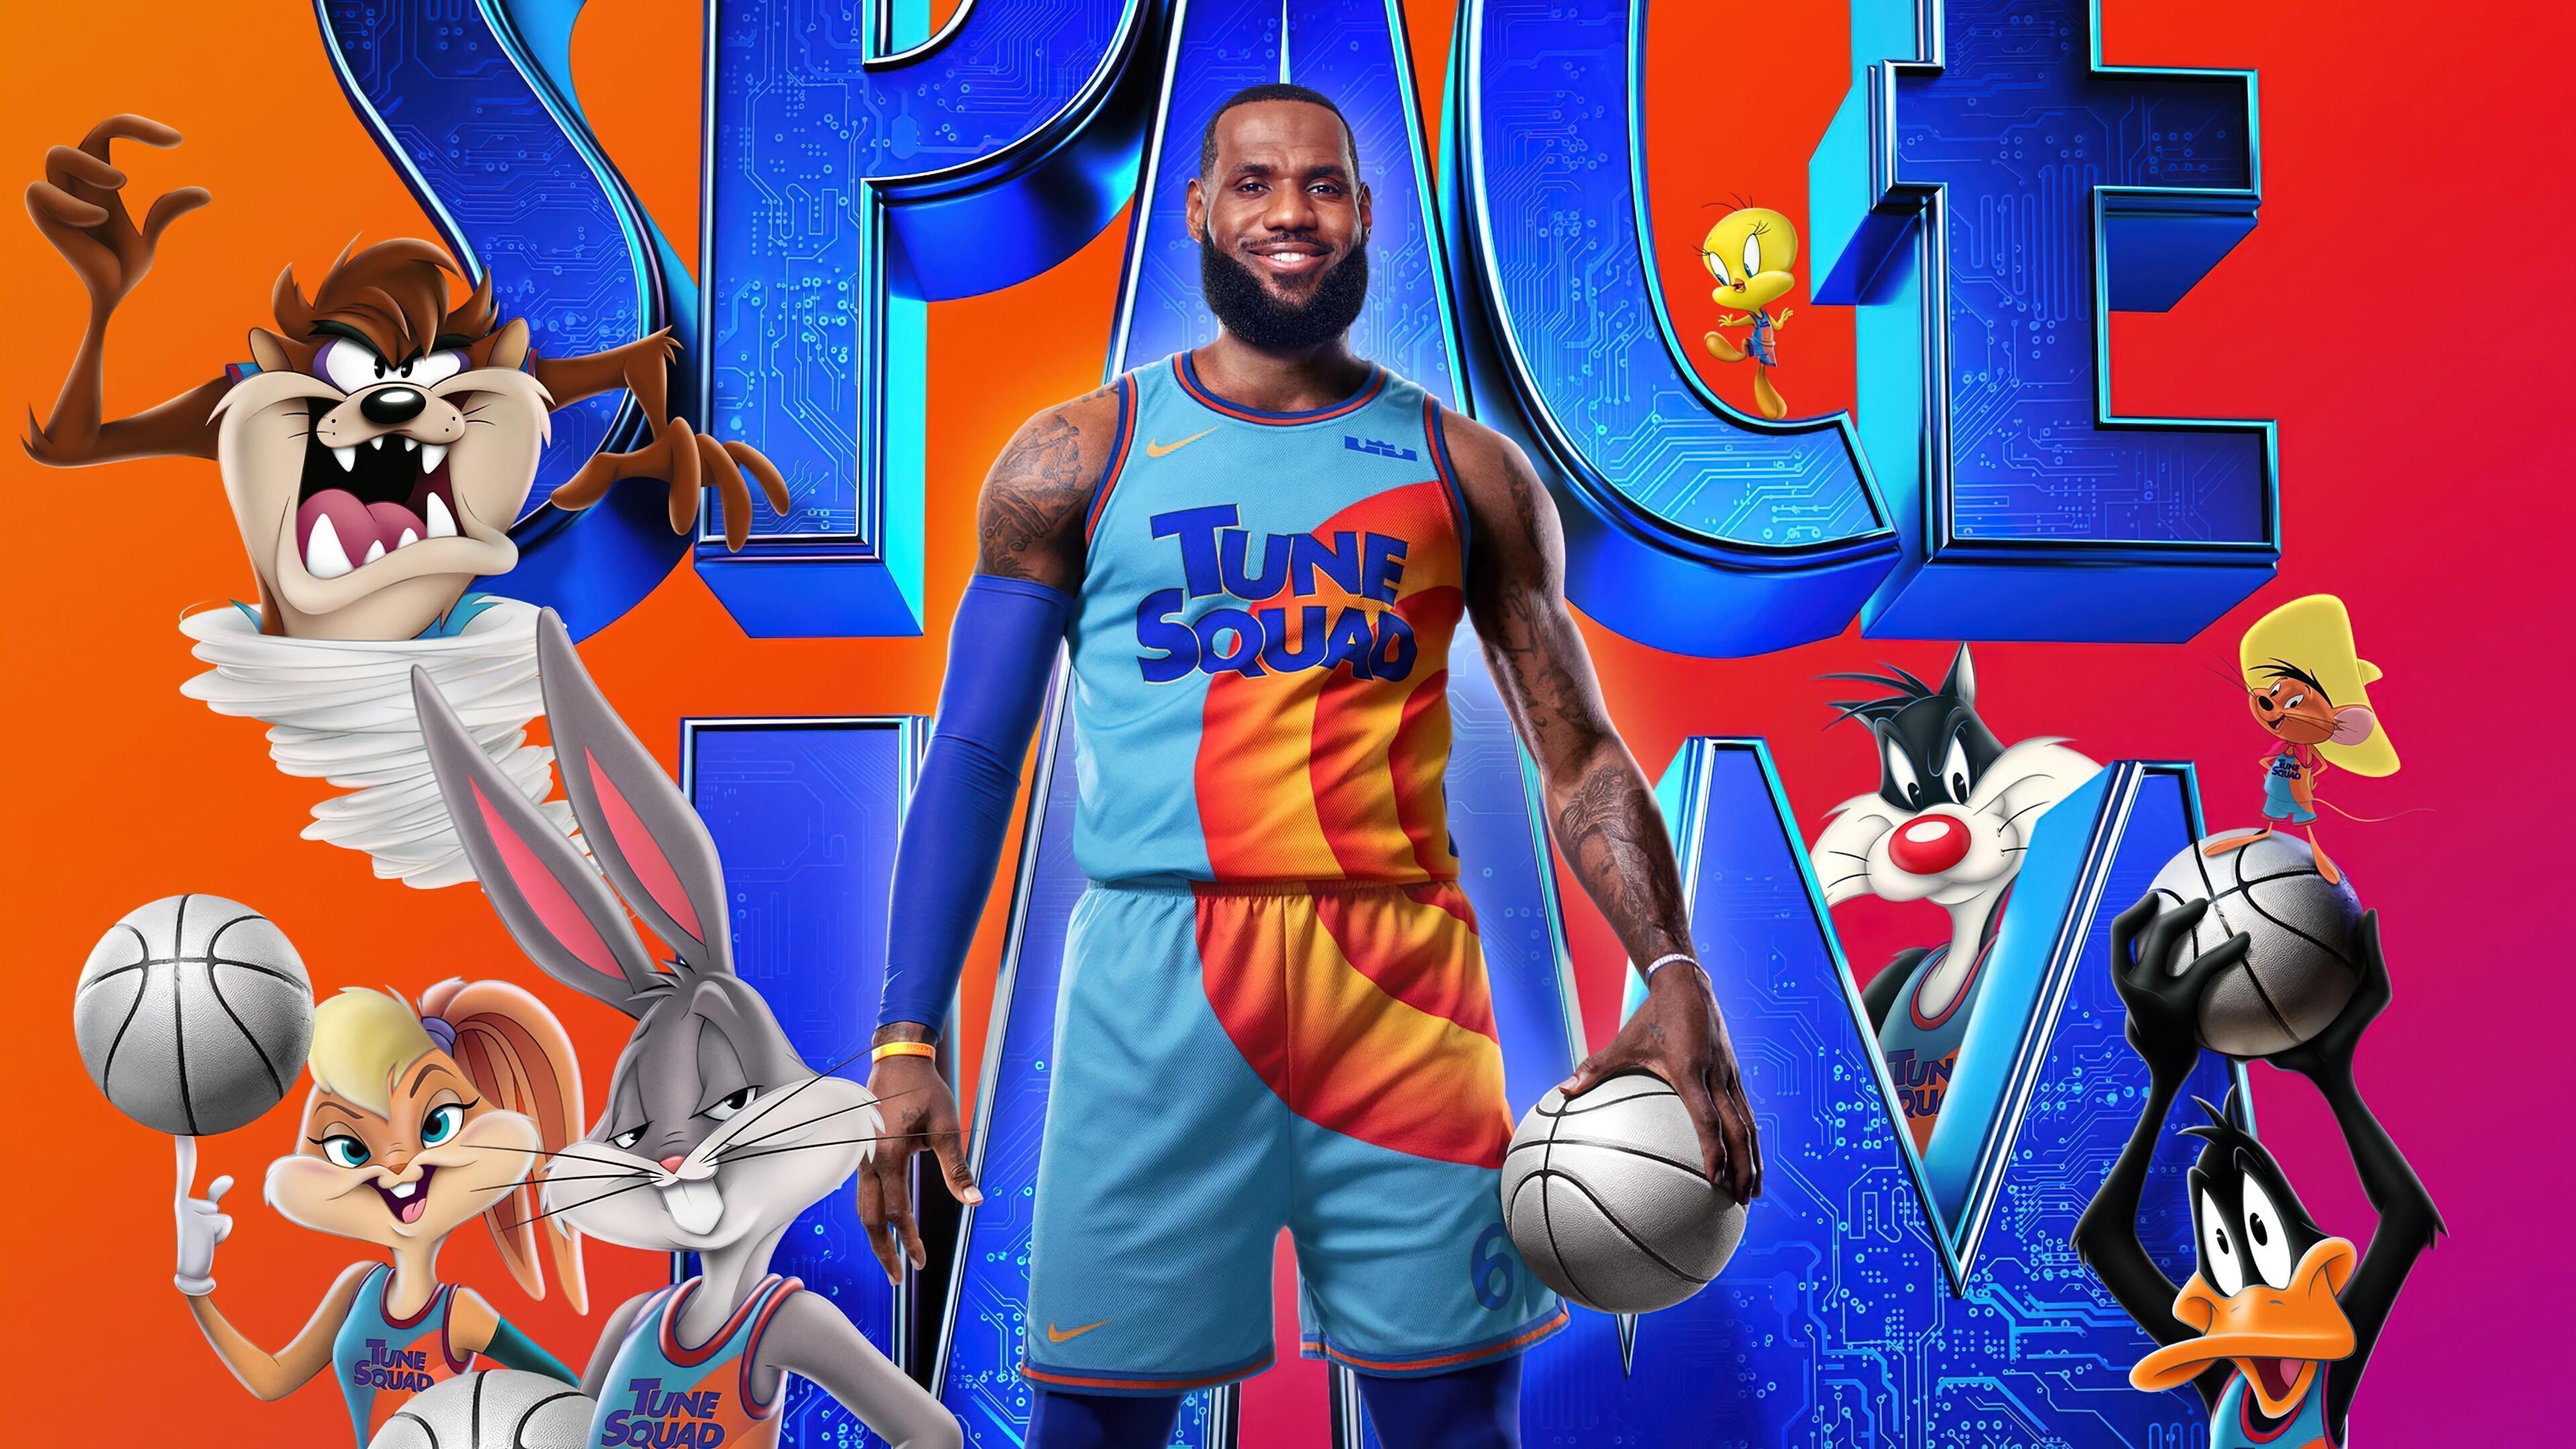 HD wallpaper, James, Poster, Lebron, Character, Pc, 4K, A New Legacy, Space Jam 2